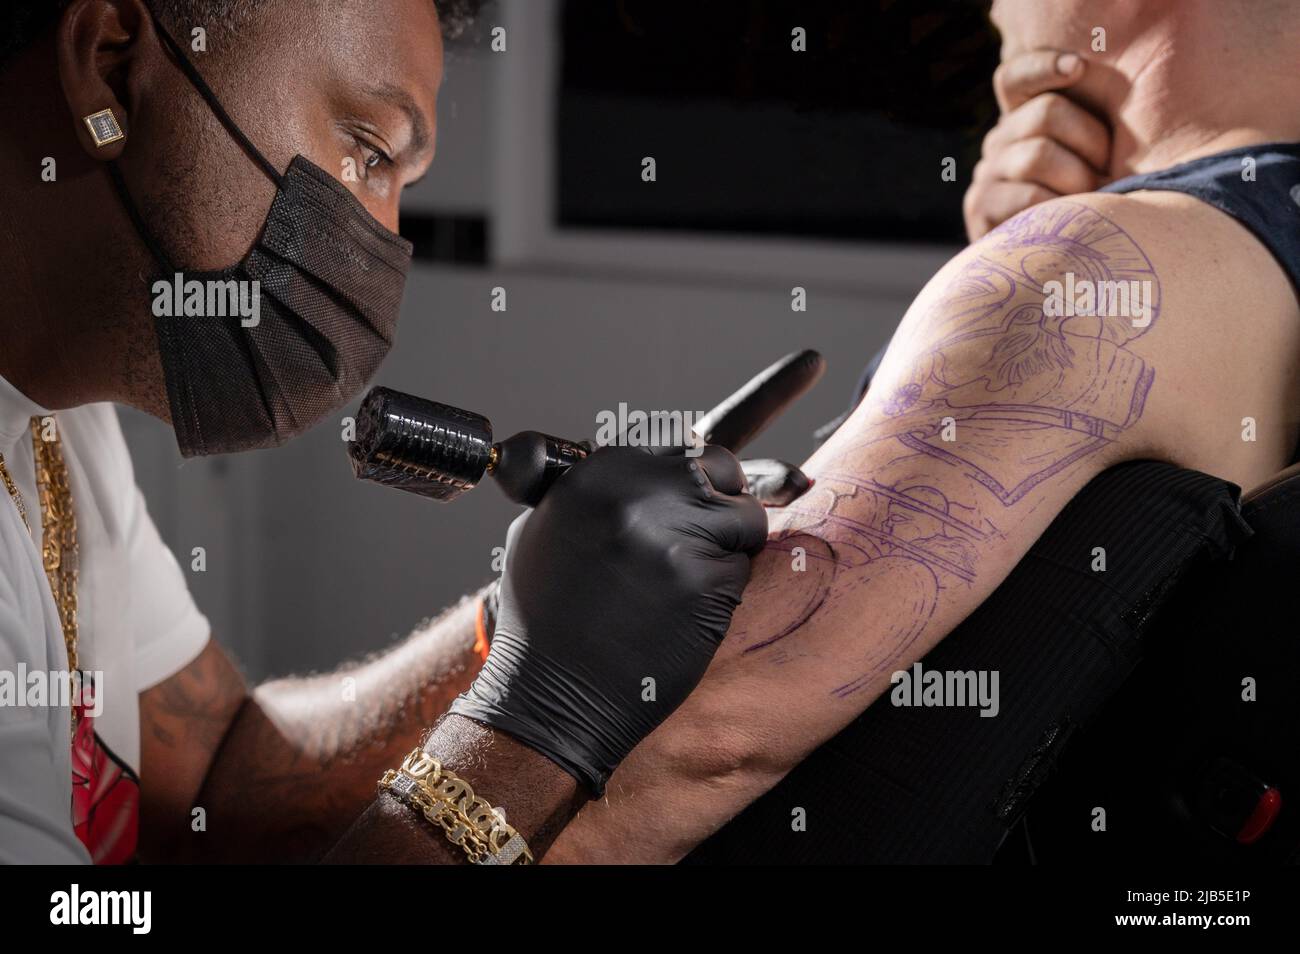 Body art at the tattoo studio. High quality photography. Stock Photo